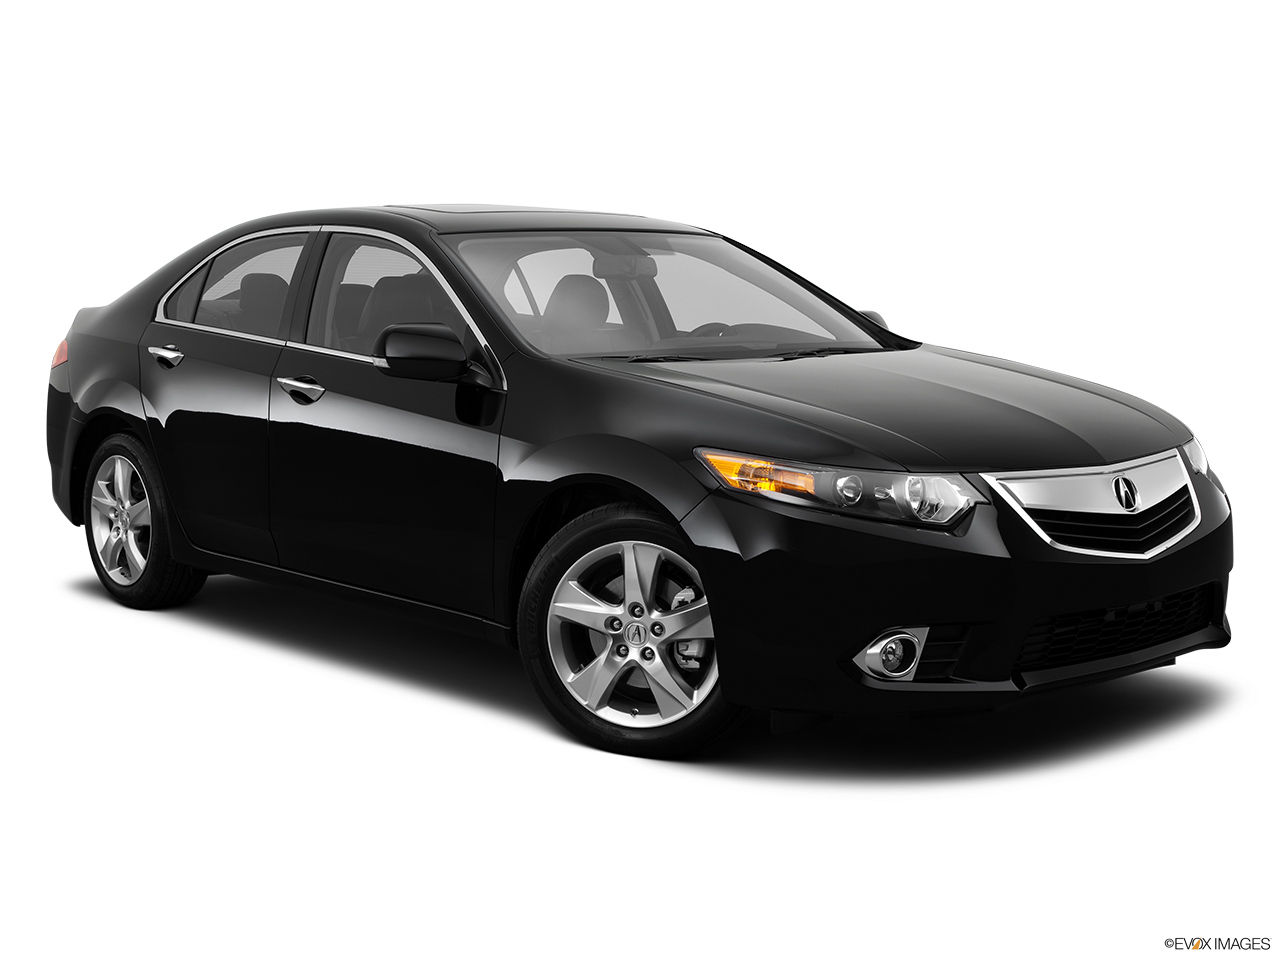 2014 Acura TSX 5-speed Automatic Front passenger 3/4 w/ wheels turned. 